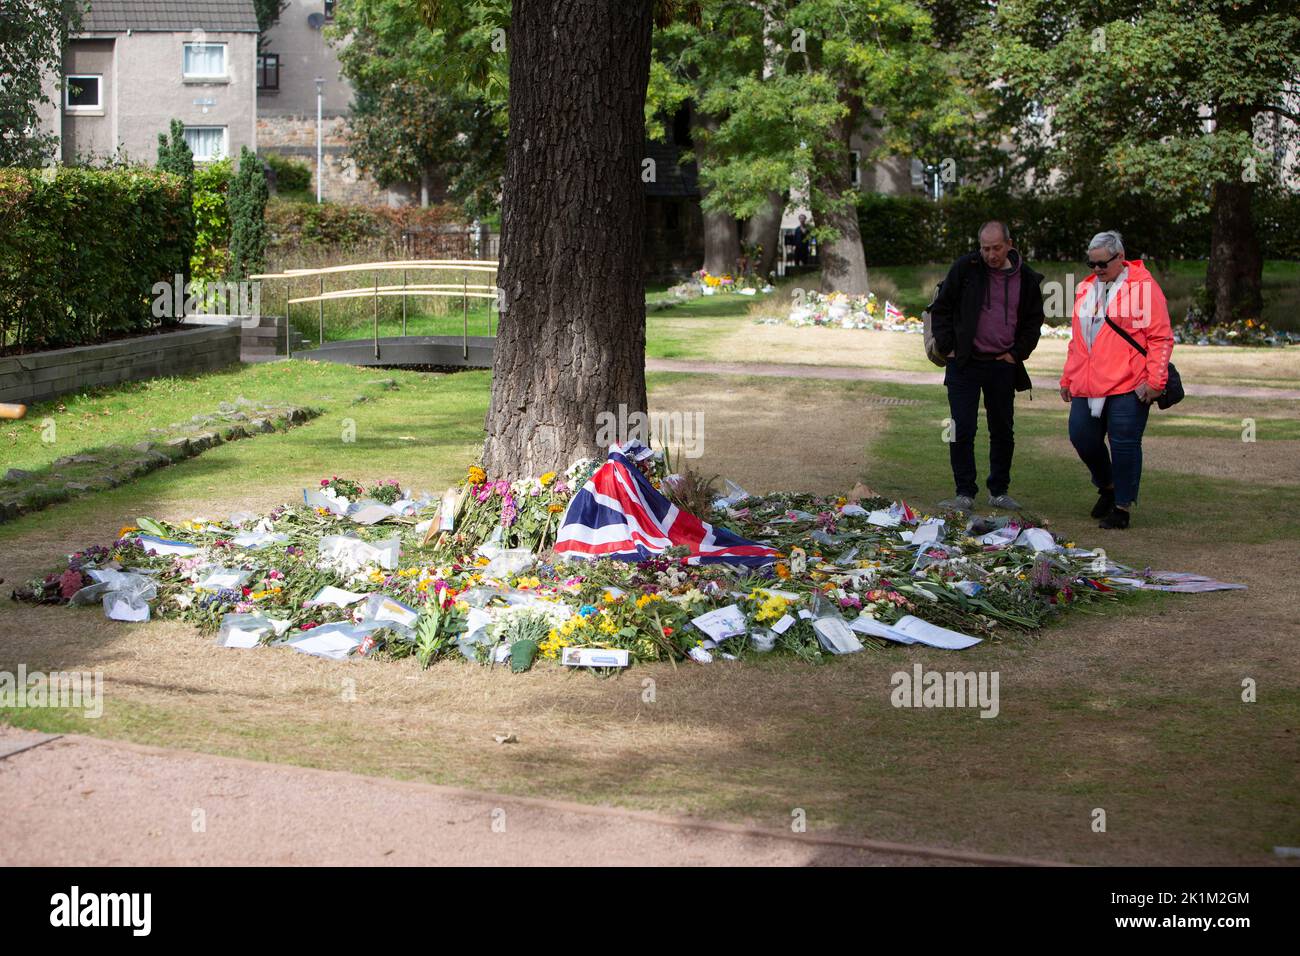 Edinburgh 19th September 2022. Funeral of The Queen Elizabeth II on 19th September 2022 take place in London. A big screen has been installed in Holyrood gardens in Edinburgh where members of the public can go and see the funeral. Pic Credit: Pako Mera/Alamy Live News Stock Photo